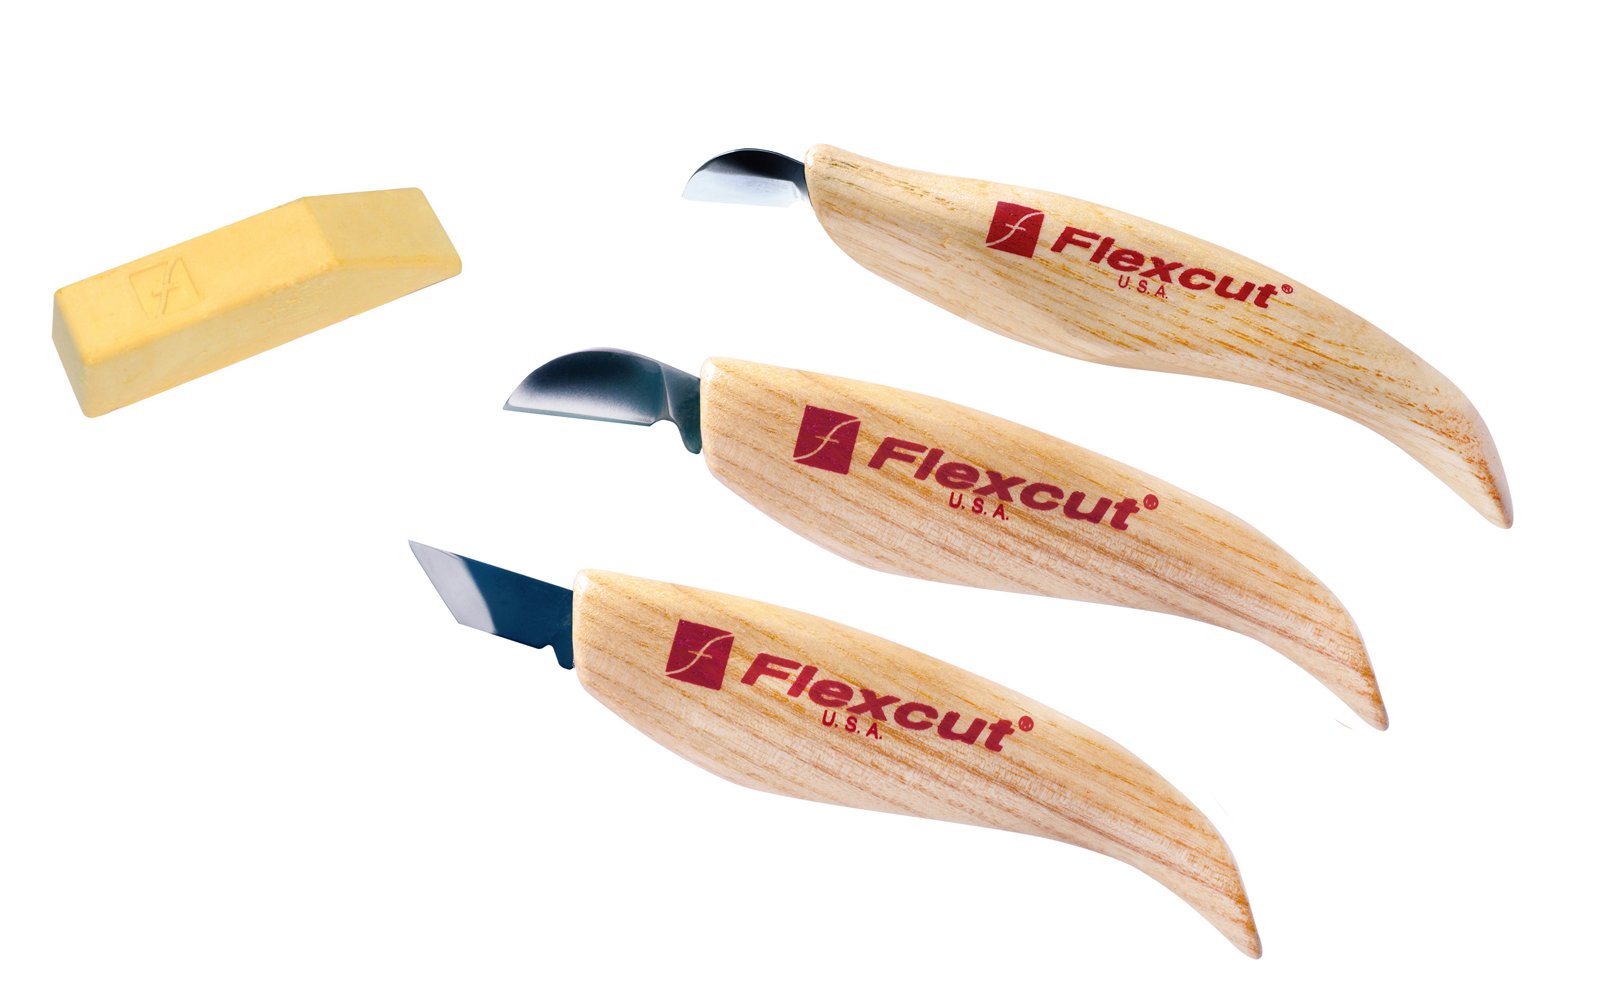 Flexcut - Chip Carving Tool Set with Sharpening Compound - 3 Piece